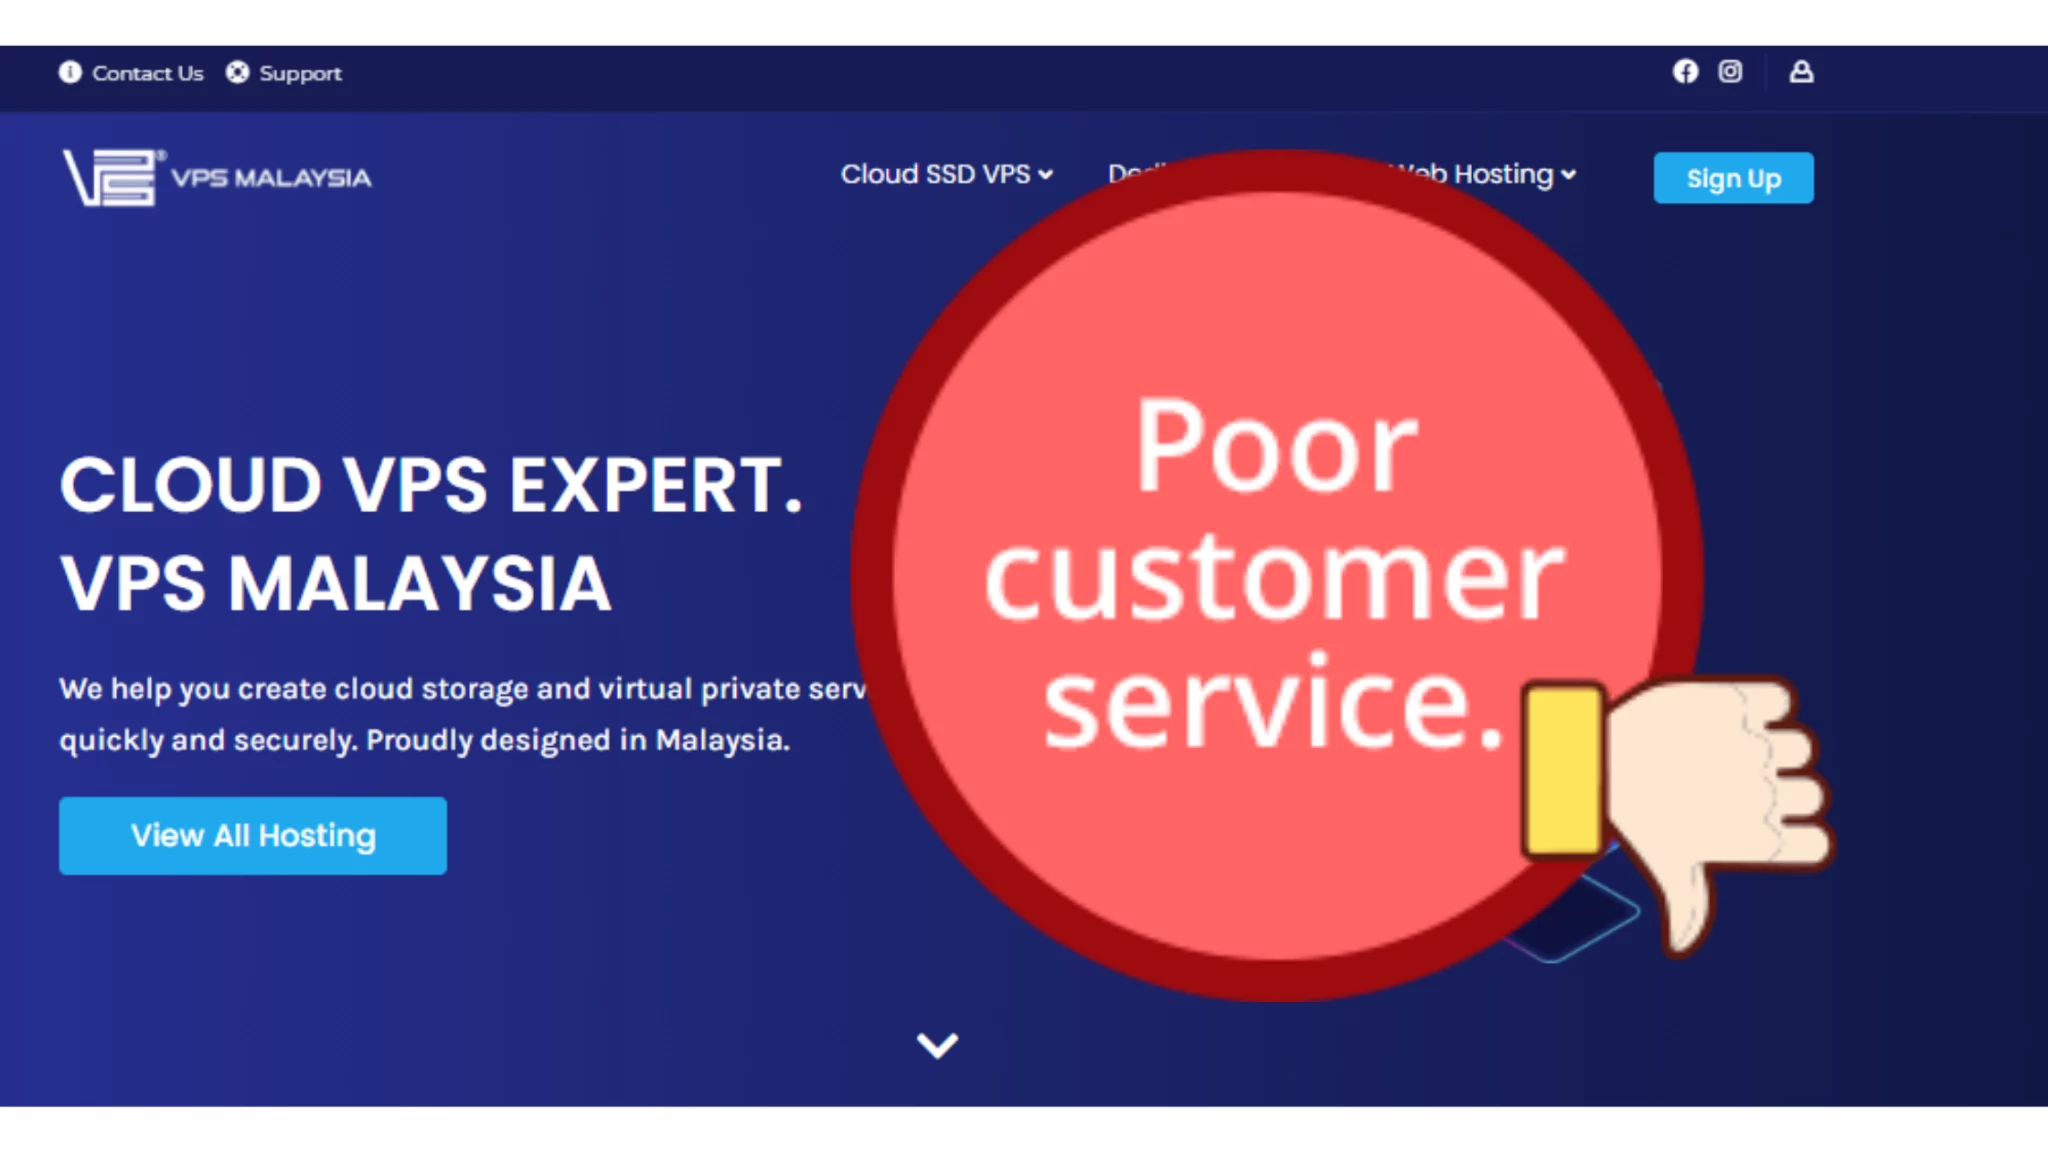 VPS Malaysia Hosting - Worst Experience